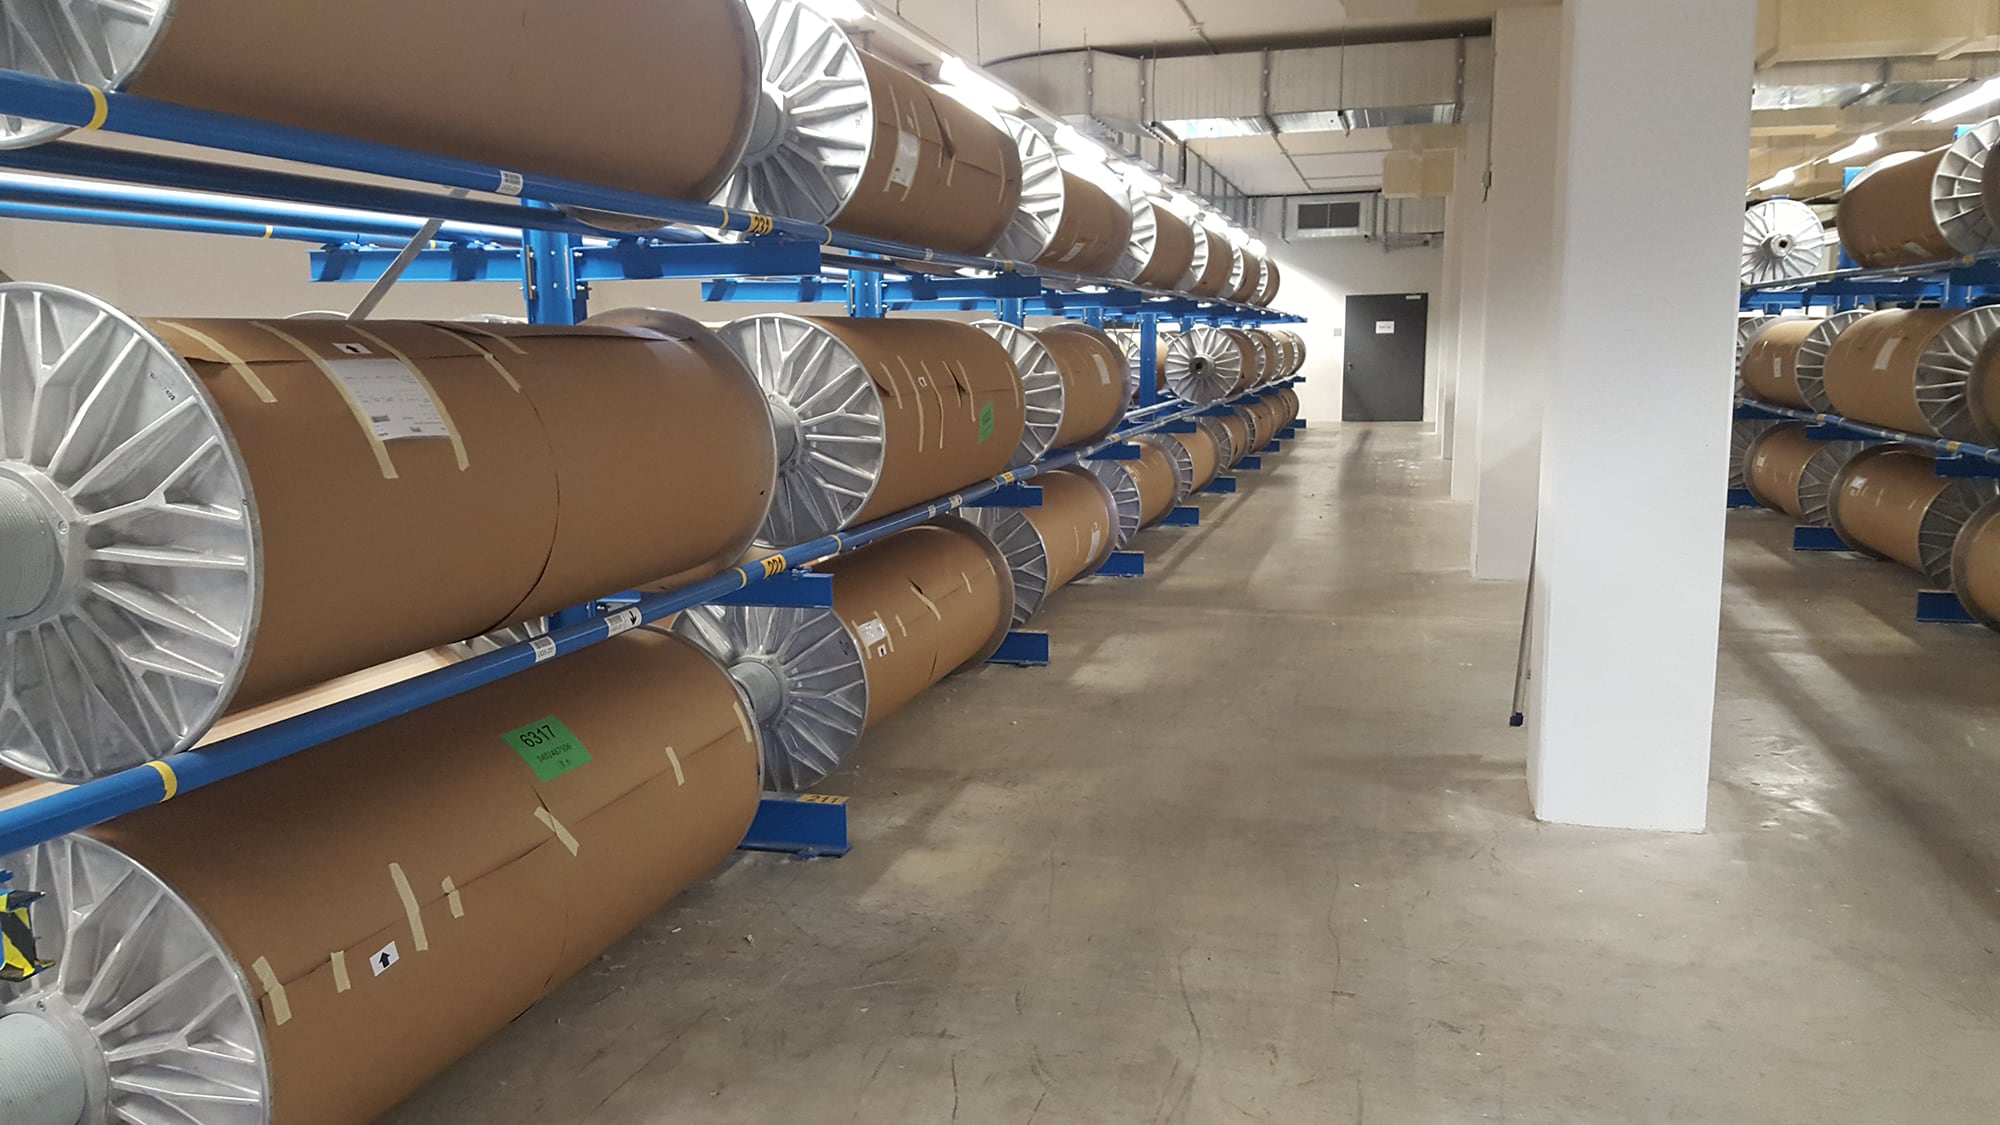 cantilever racking, storage of textile rolls